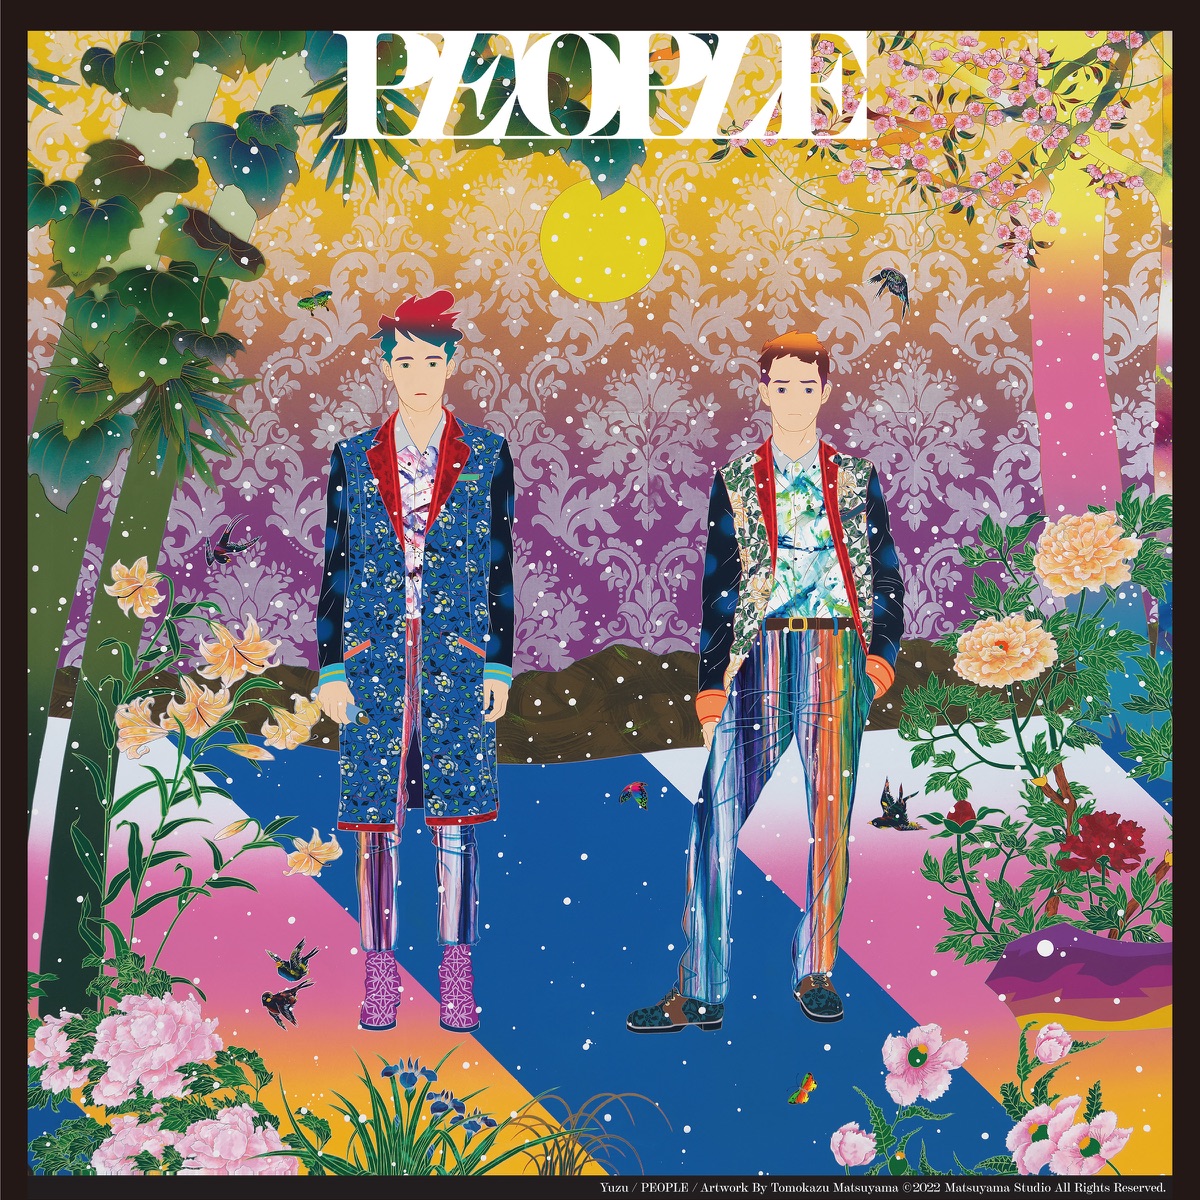 Cover art for『YUZU - 六角形』from the release『PEOPLE